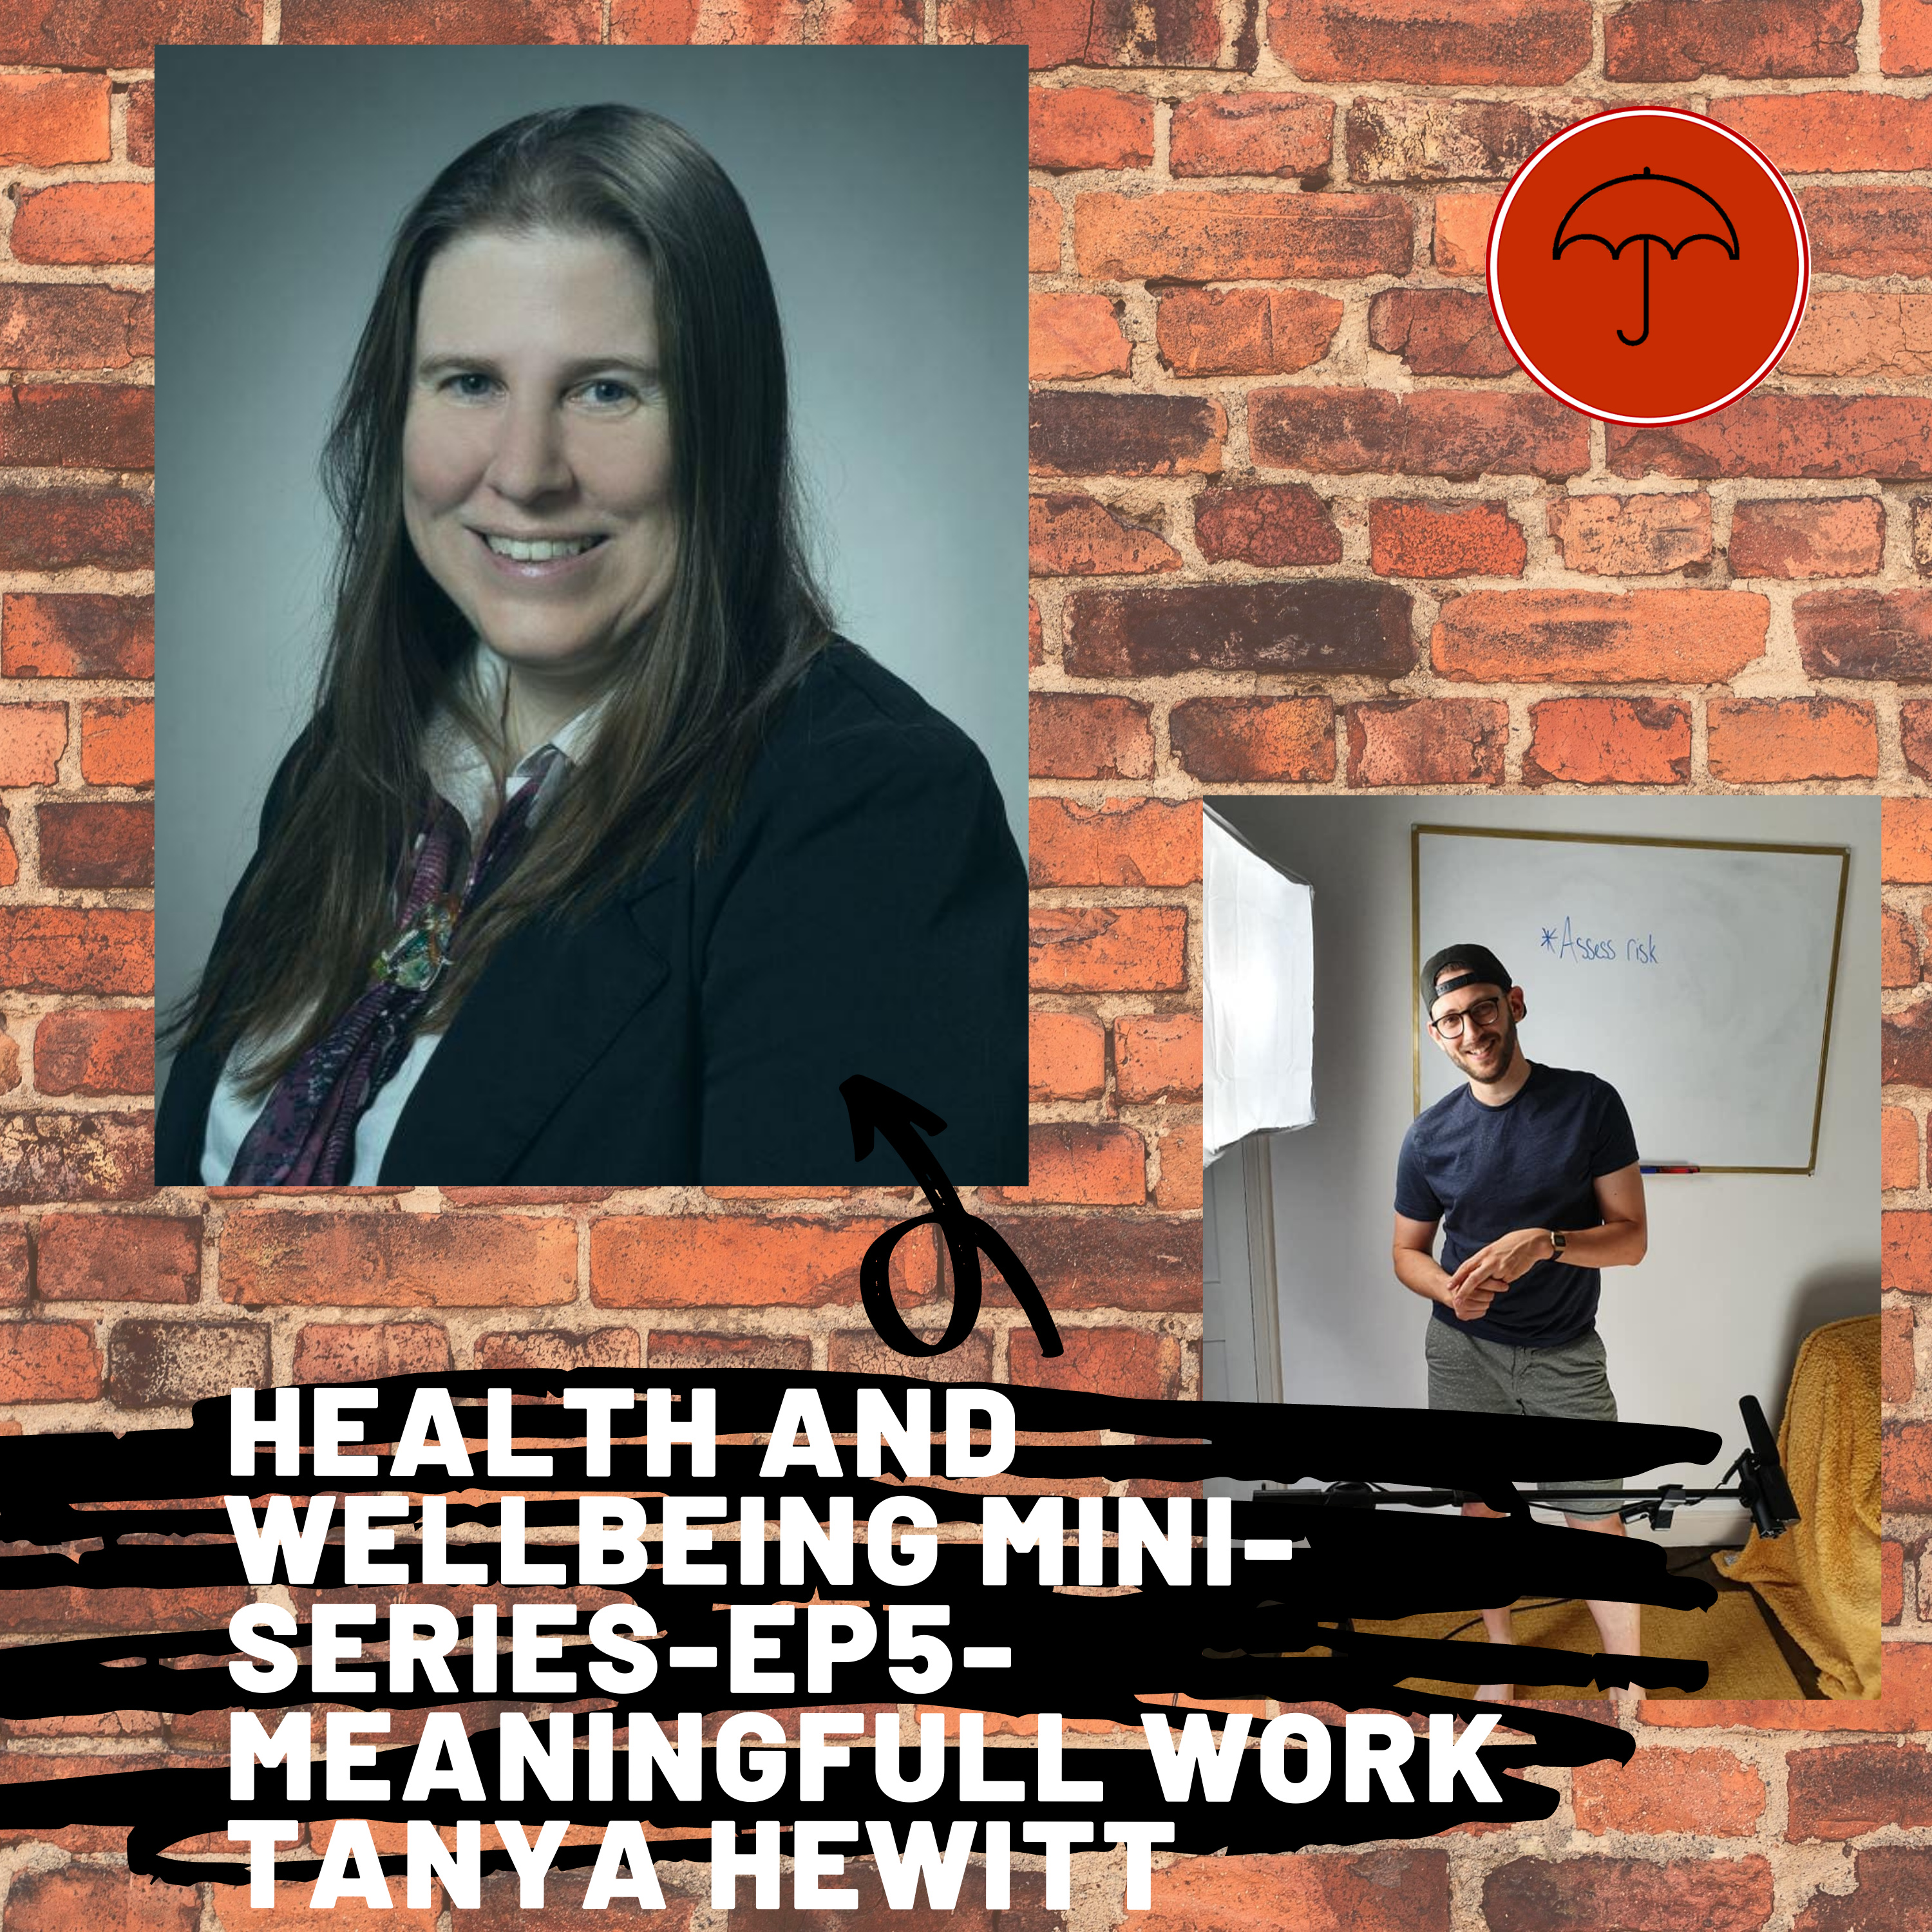 Meaningful work with Tanya Hewitt- Part 5-Health and Well being mini series ep 77